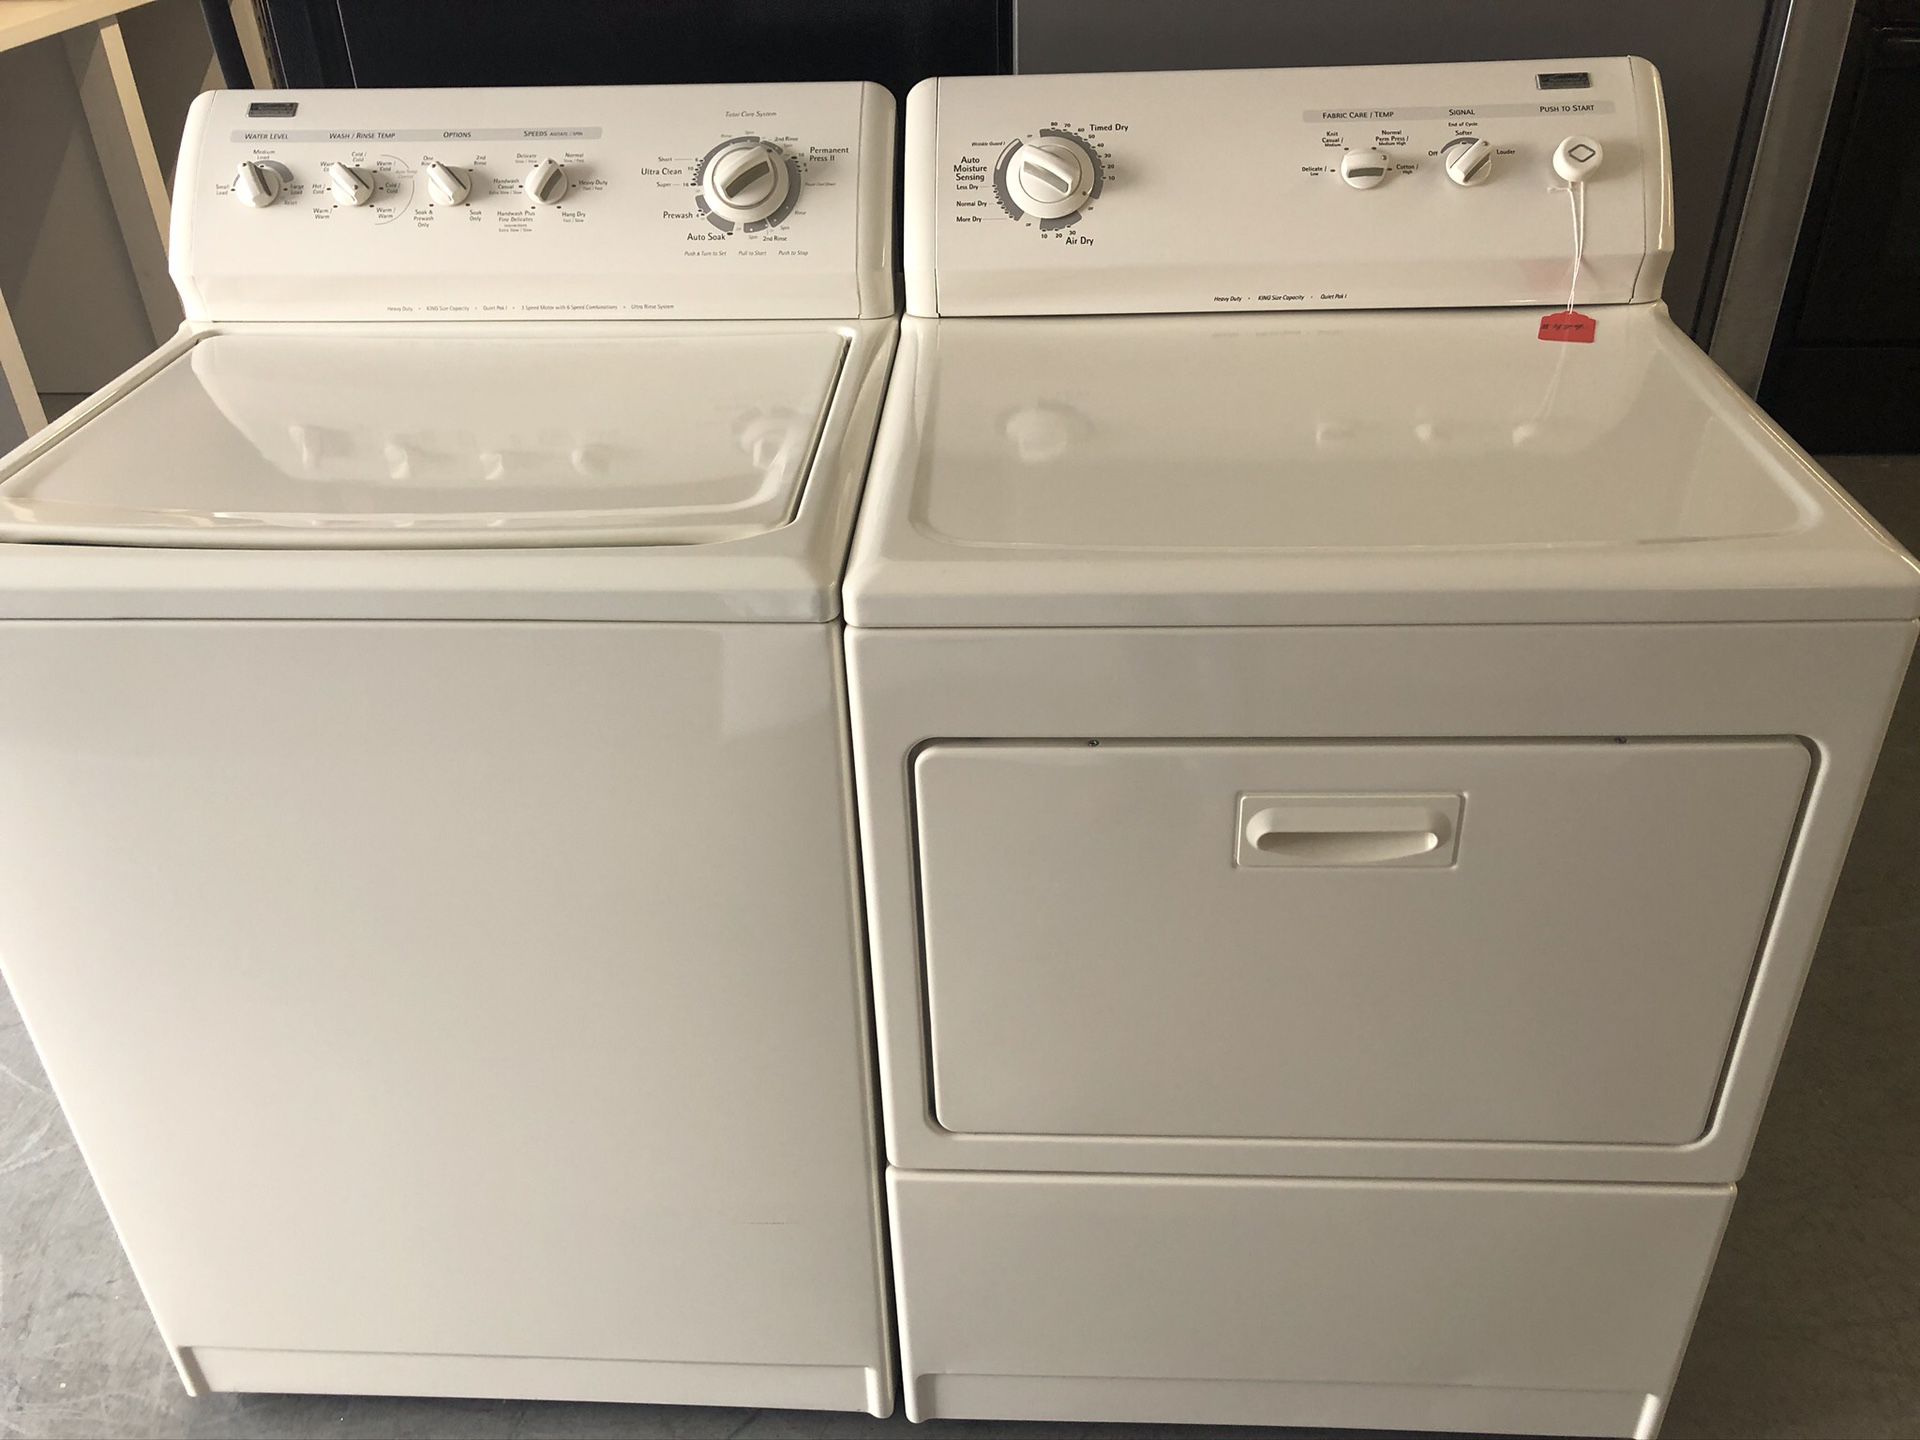 Used kenmore Elite washer and dryer set. 1 year warranty